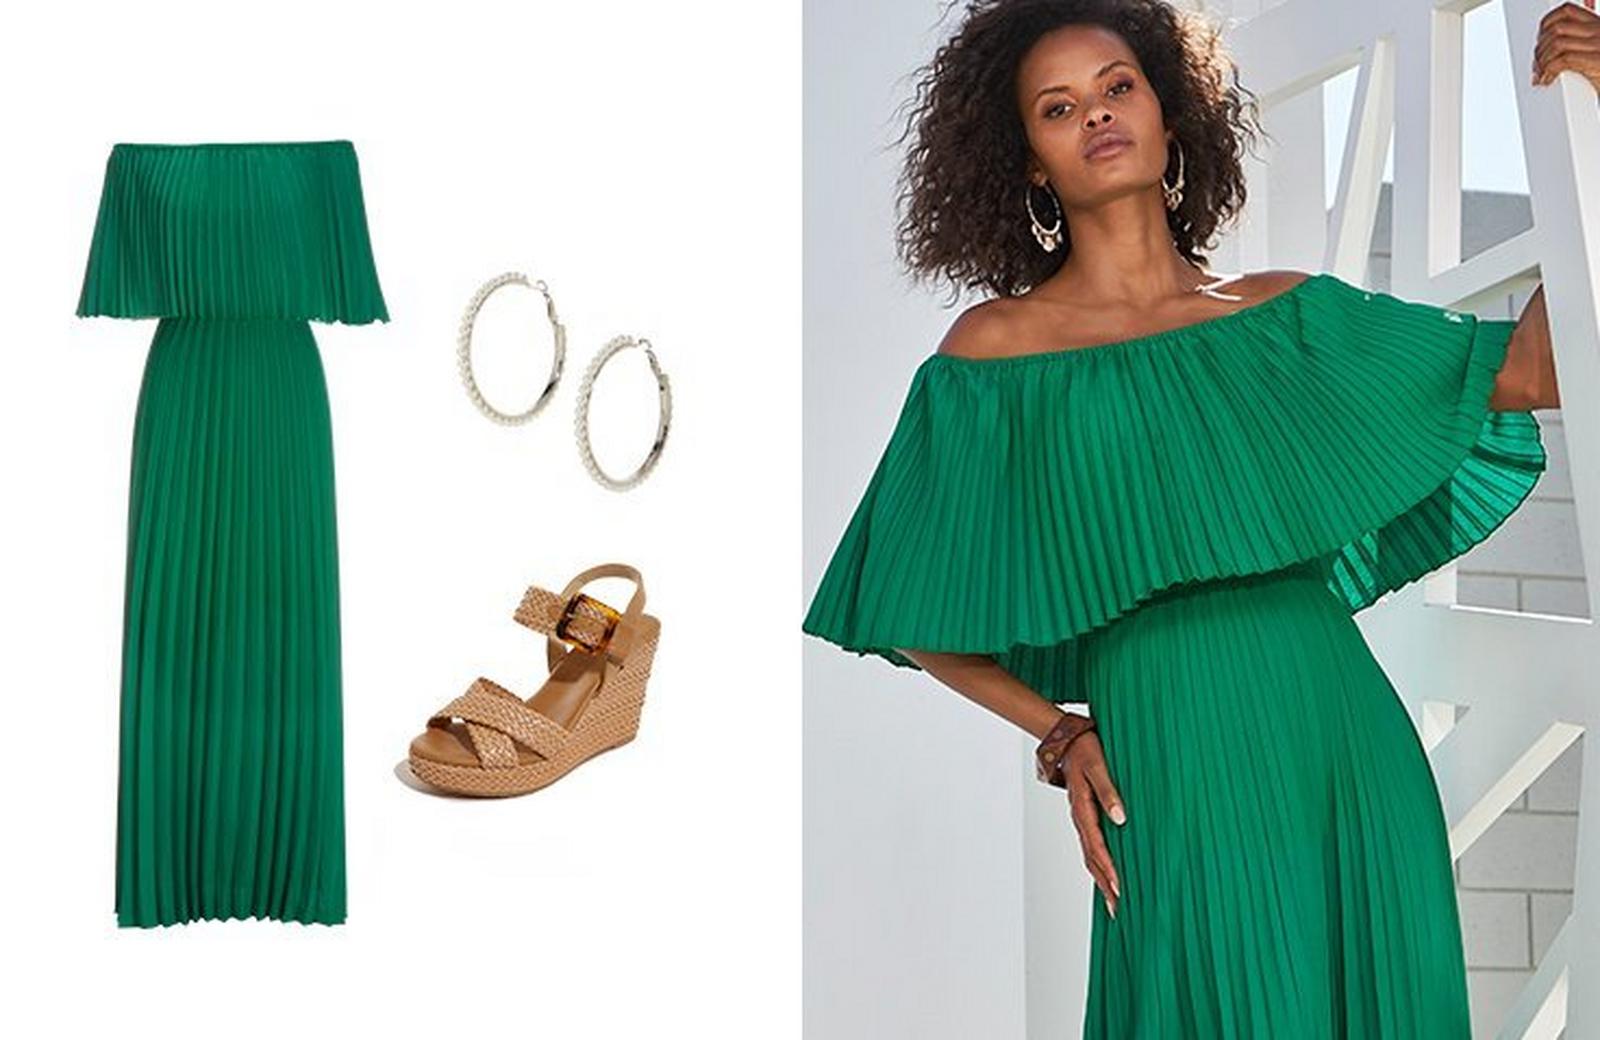 left panel: green off-the-shoulder pleated maxi dress, silver hoop earrings, and tan wedges. right model wearing a green pleated off-the-shoulder maxi dress.